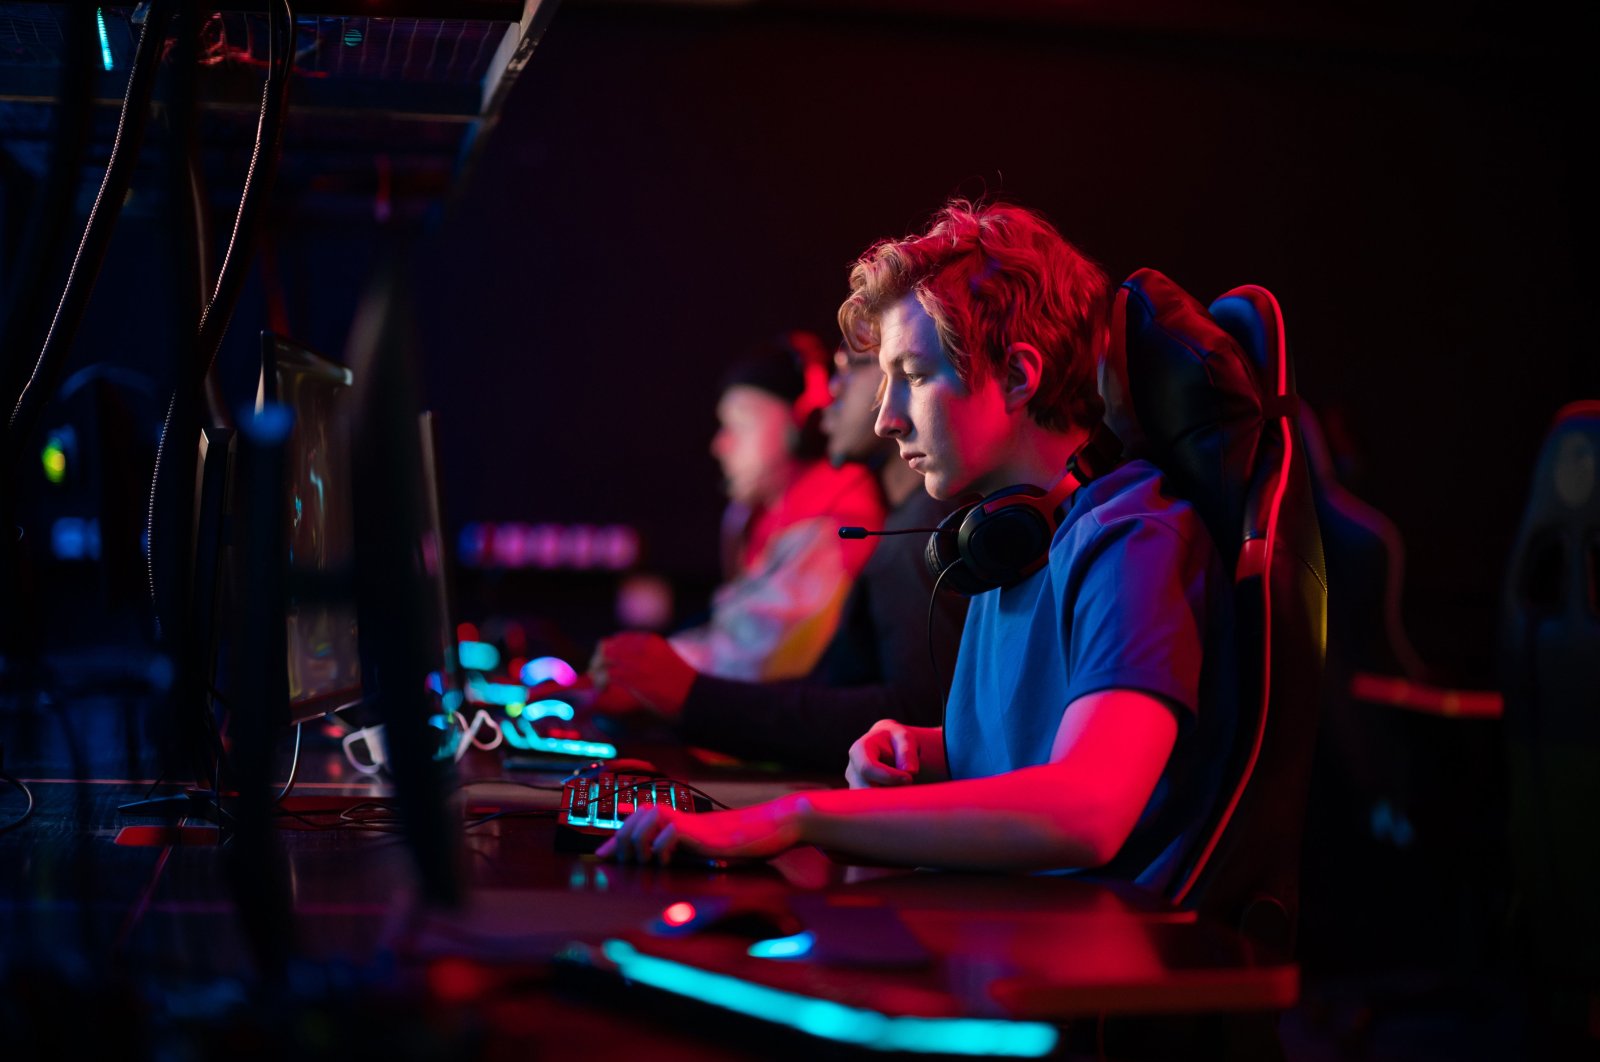 Training bootcamp for professional esports players. (iStock Photo)